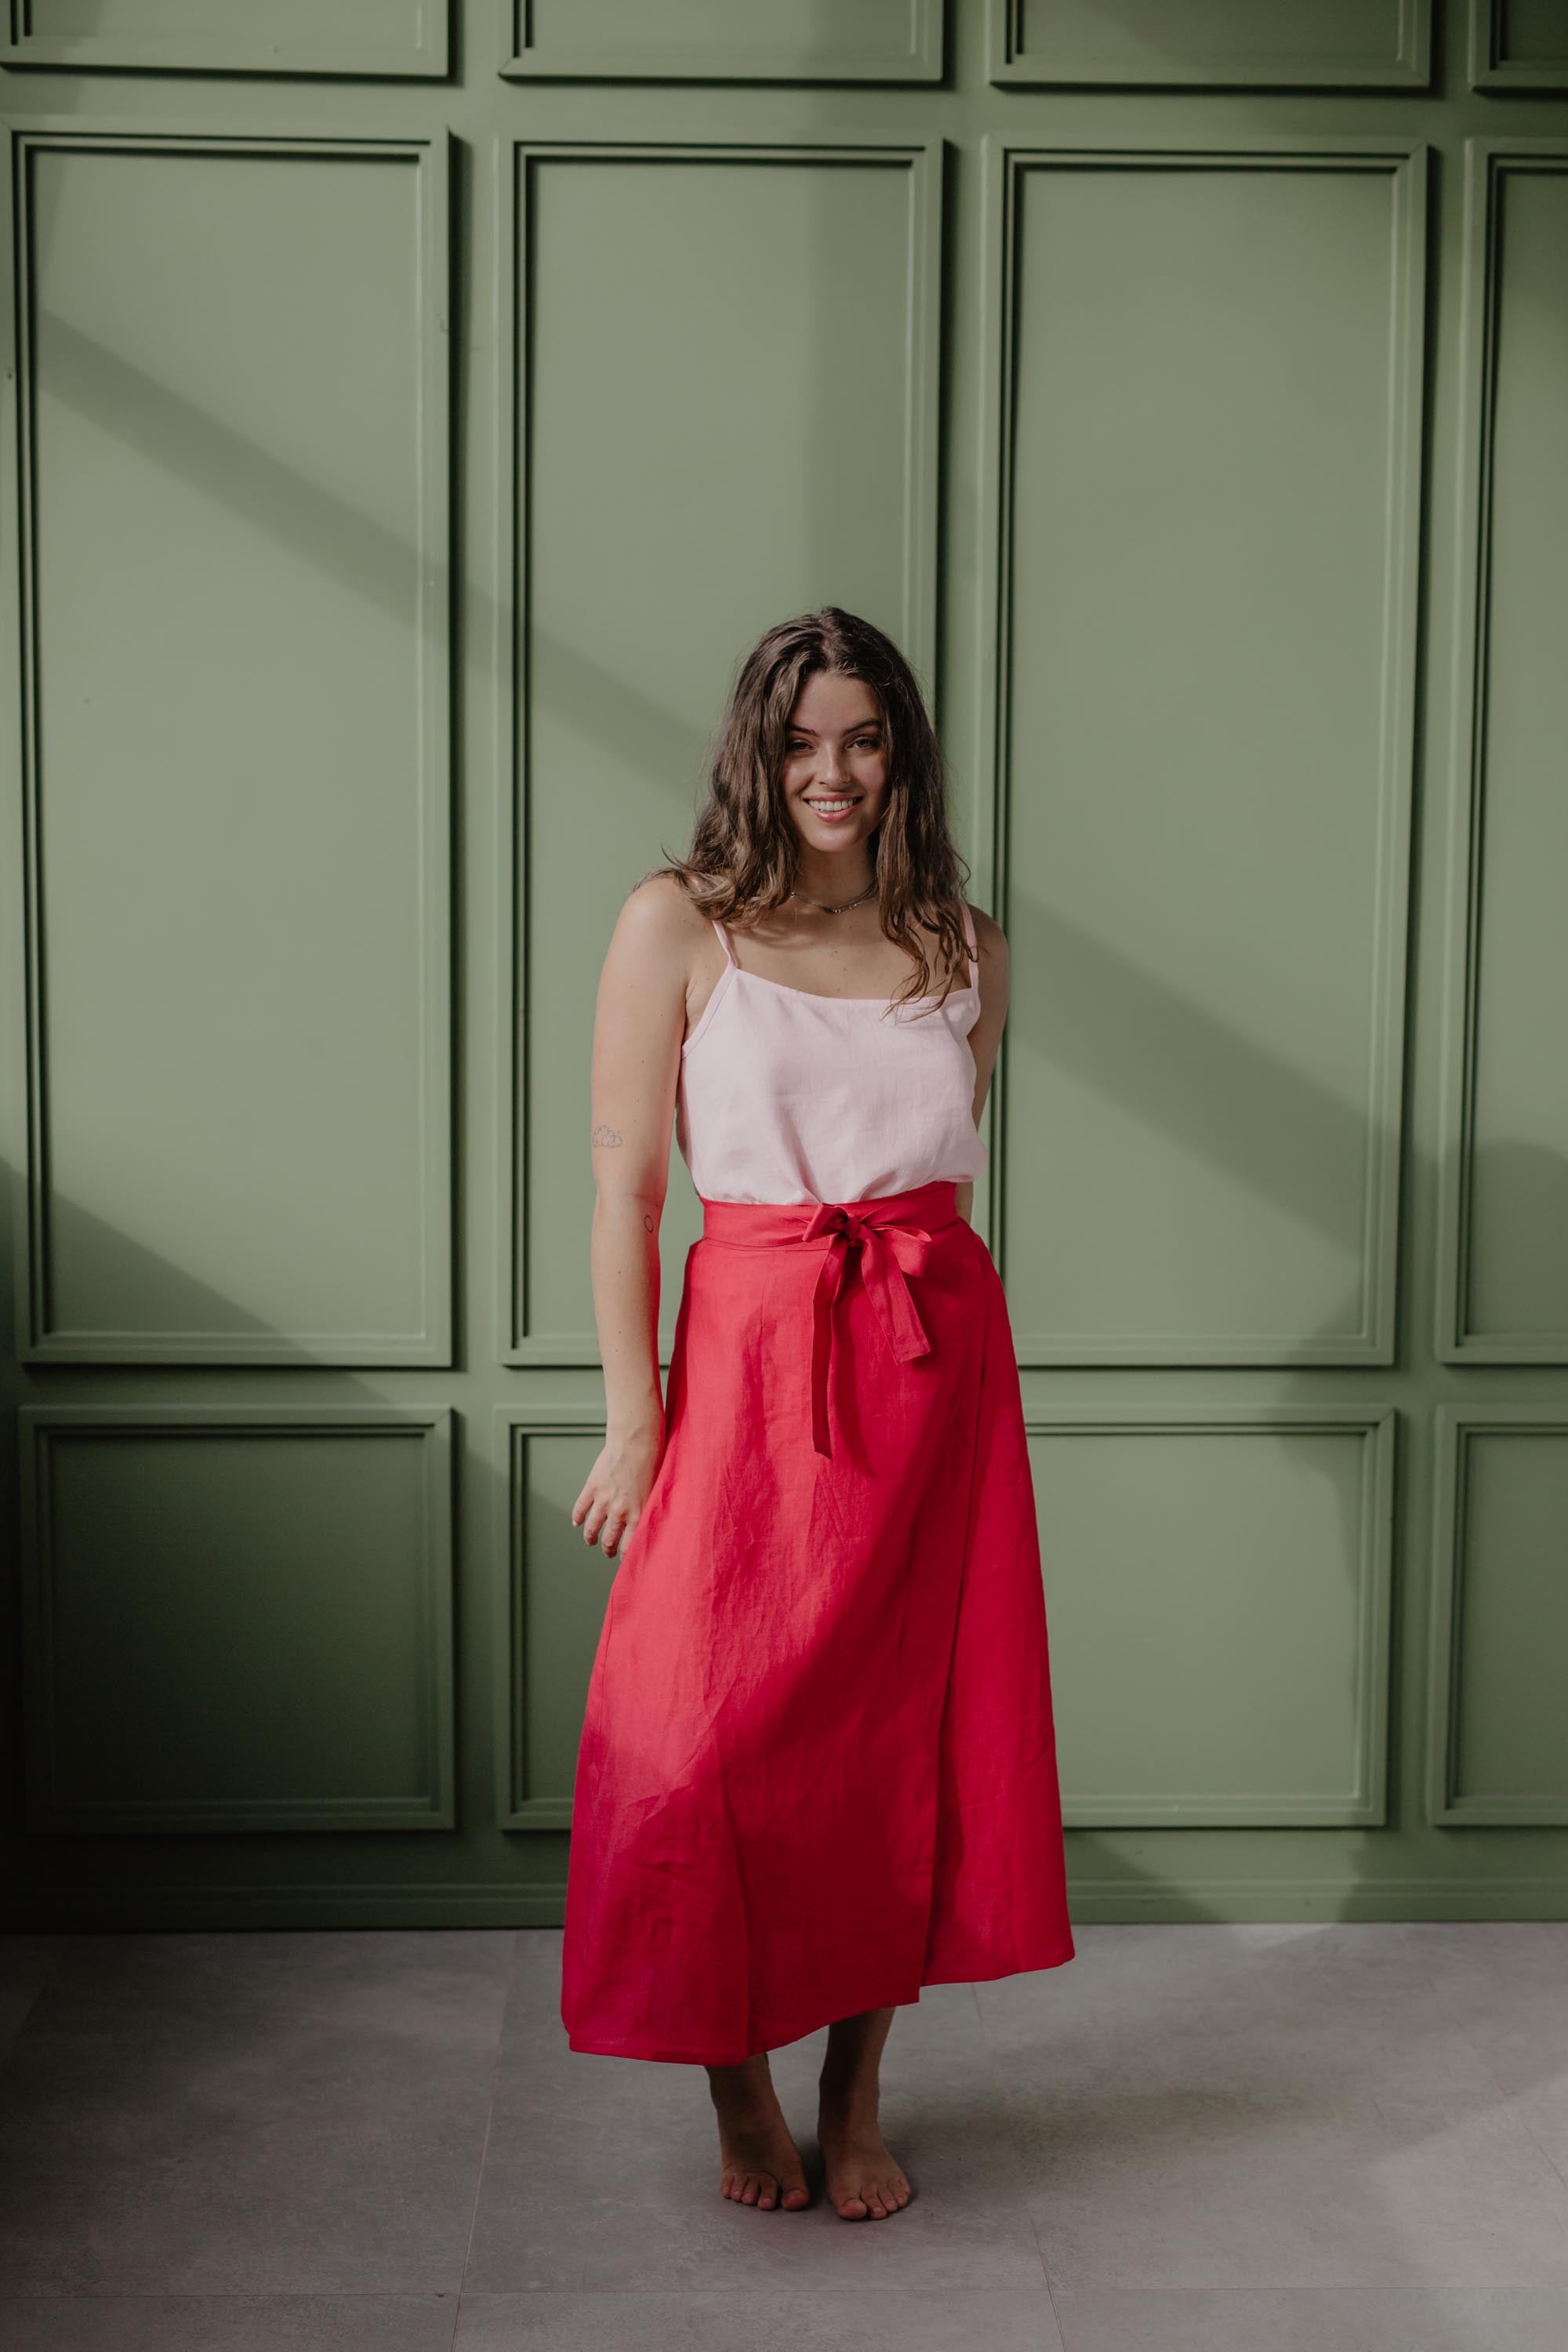 Fron View Of Woemn Wearing A Red Linen Wrap Skirt And Light Pink Top